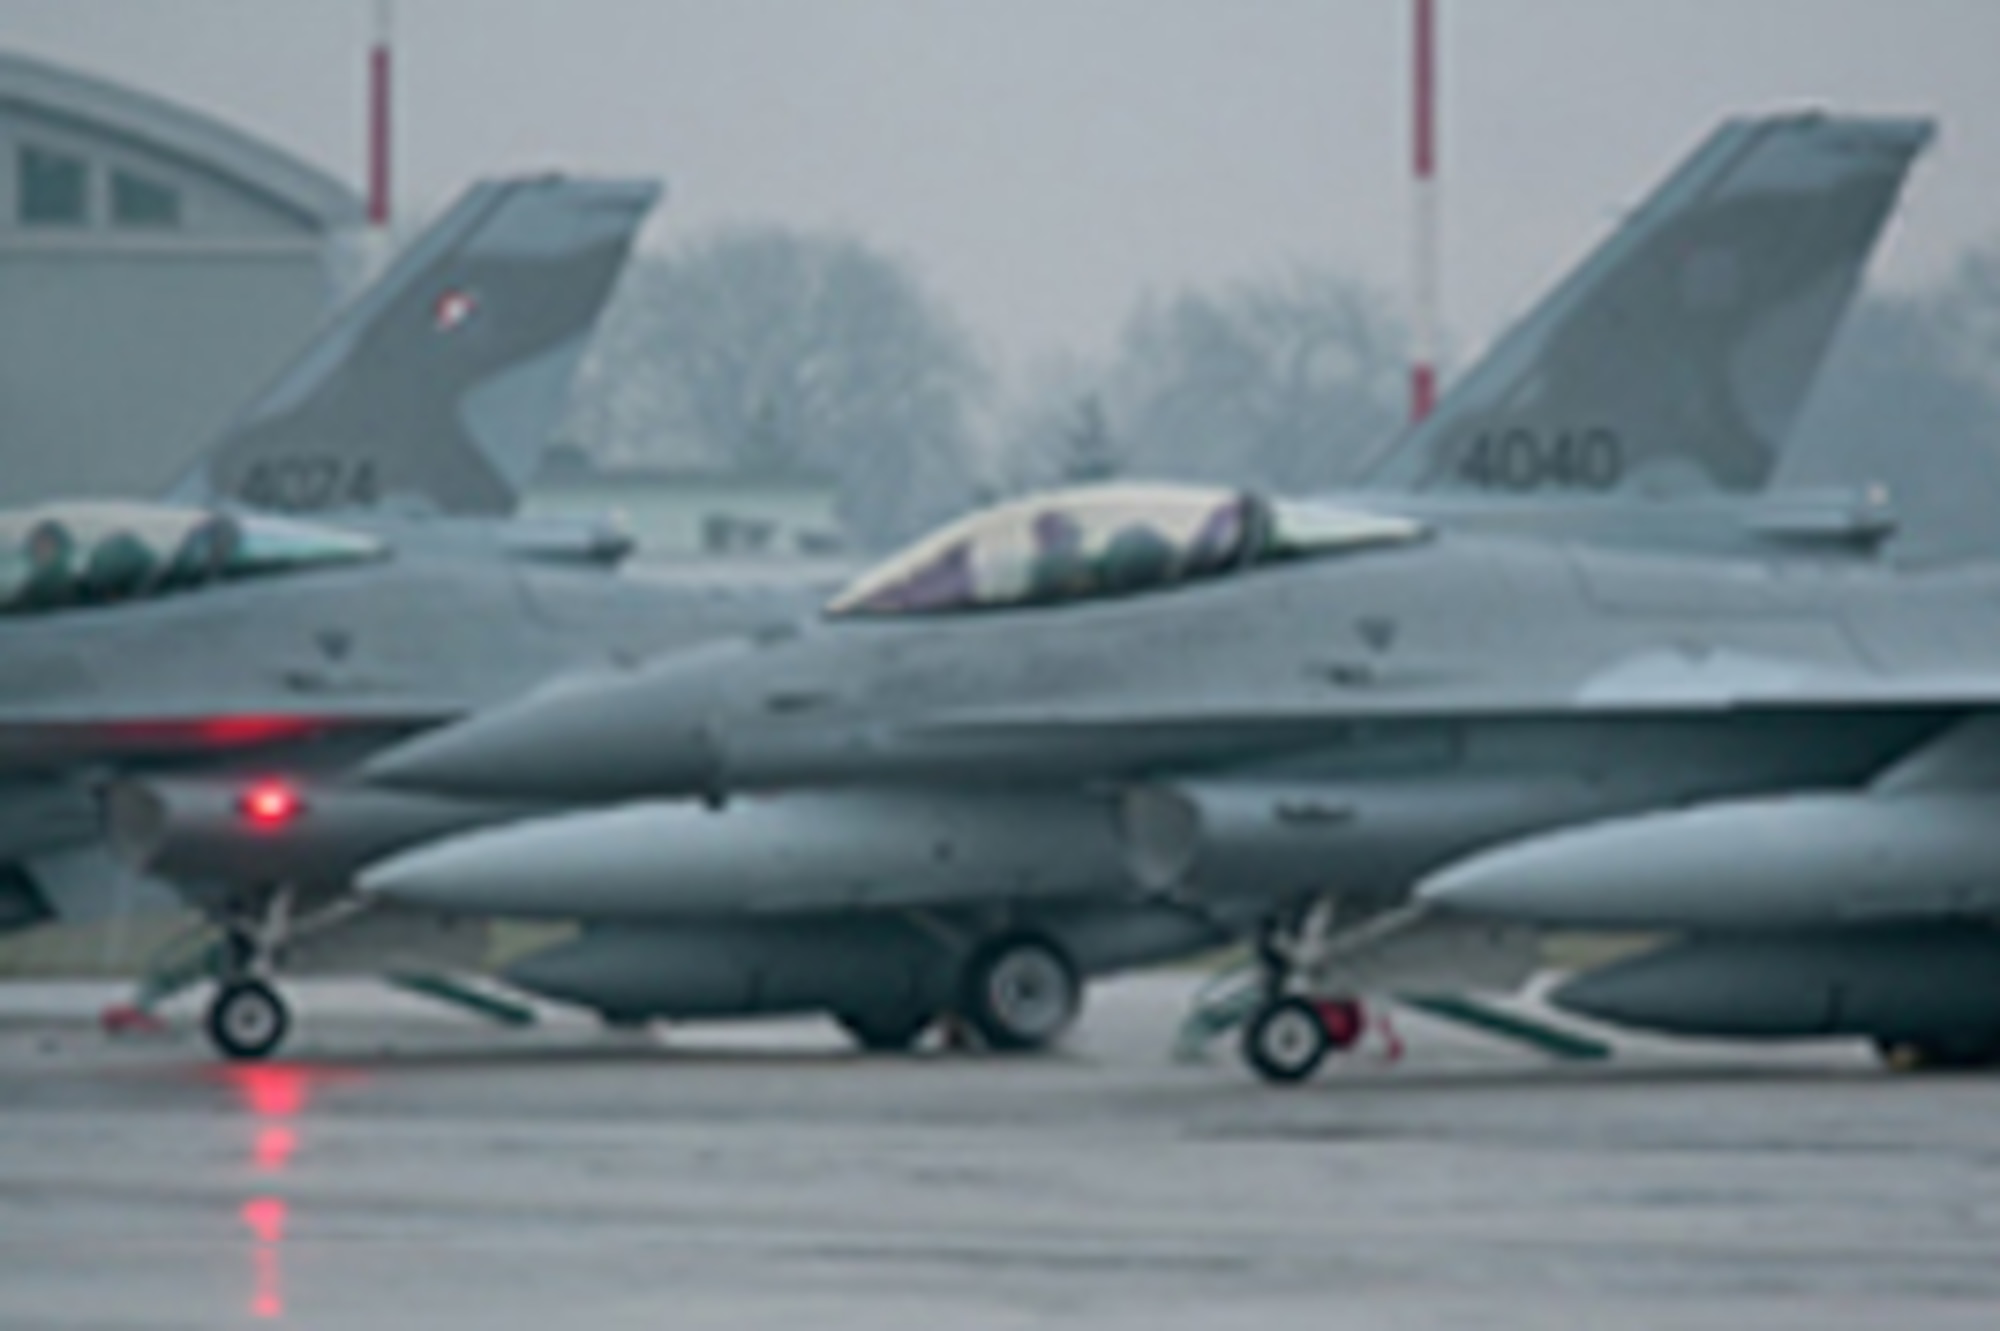 Pilots from the Arizona Air National Guard's 162nd Fighter Wing deliver the last three F-16 "Jastrzab," or Hawks as their called, to the Polish Air Force at Krzesiny Air Base, Poland, Dec. 11, 2008. These jets represent the last of 48 aircraft Poland purchased as part of the "Peace Sky" program. Poland continues to send F-16 student pilots to the 162nd at Tucson International Airport for training. (U.S. State Department photo)